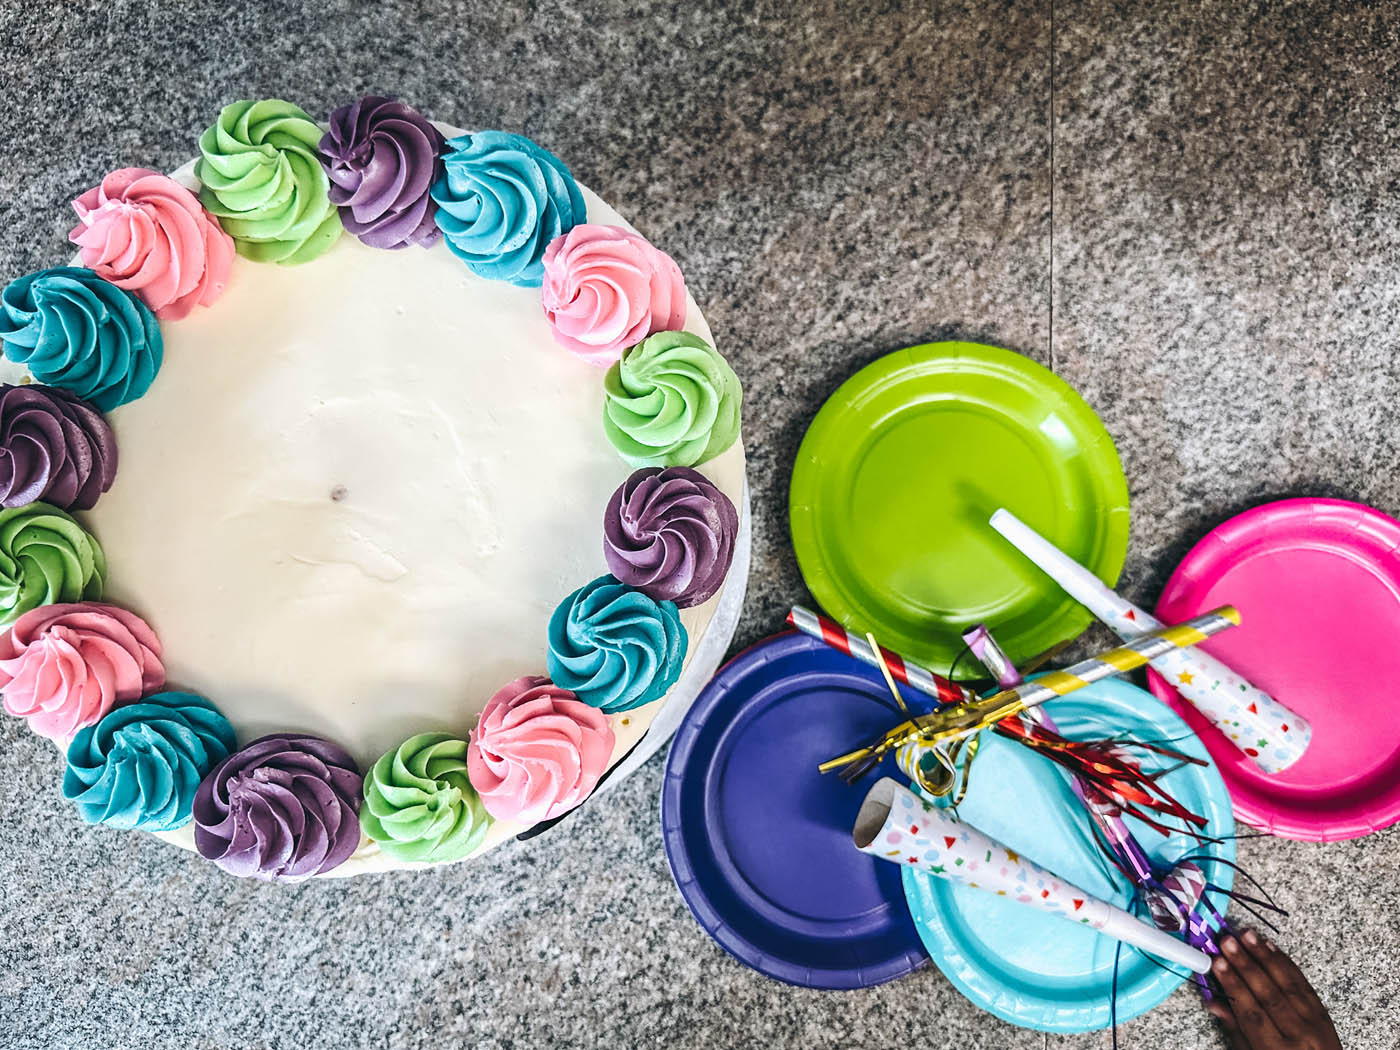 A cake and party supplies - party utensil supplies provided at Romp n' Roll toddler birthday venues in St. Petersburg, FL.